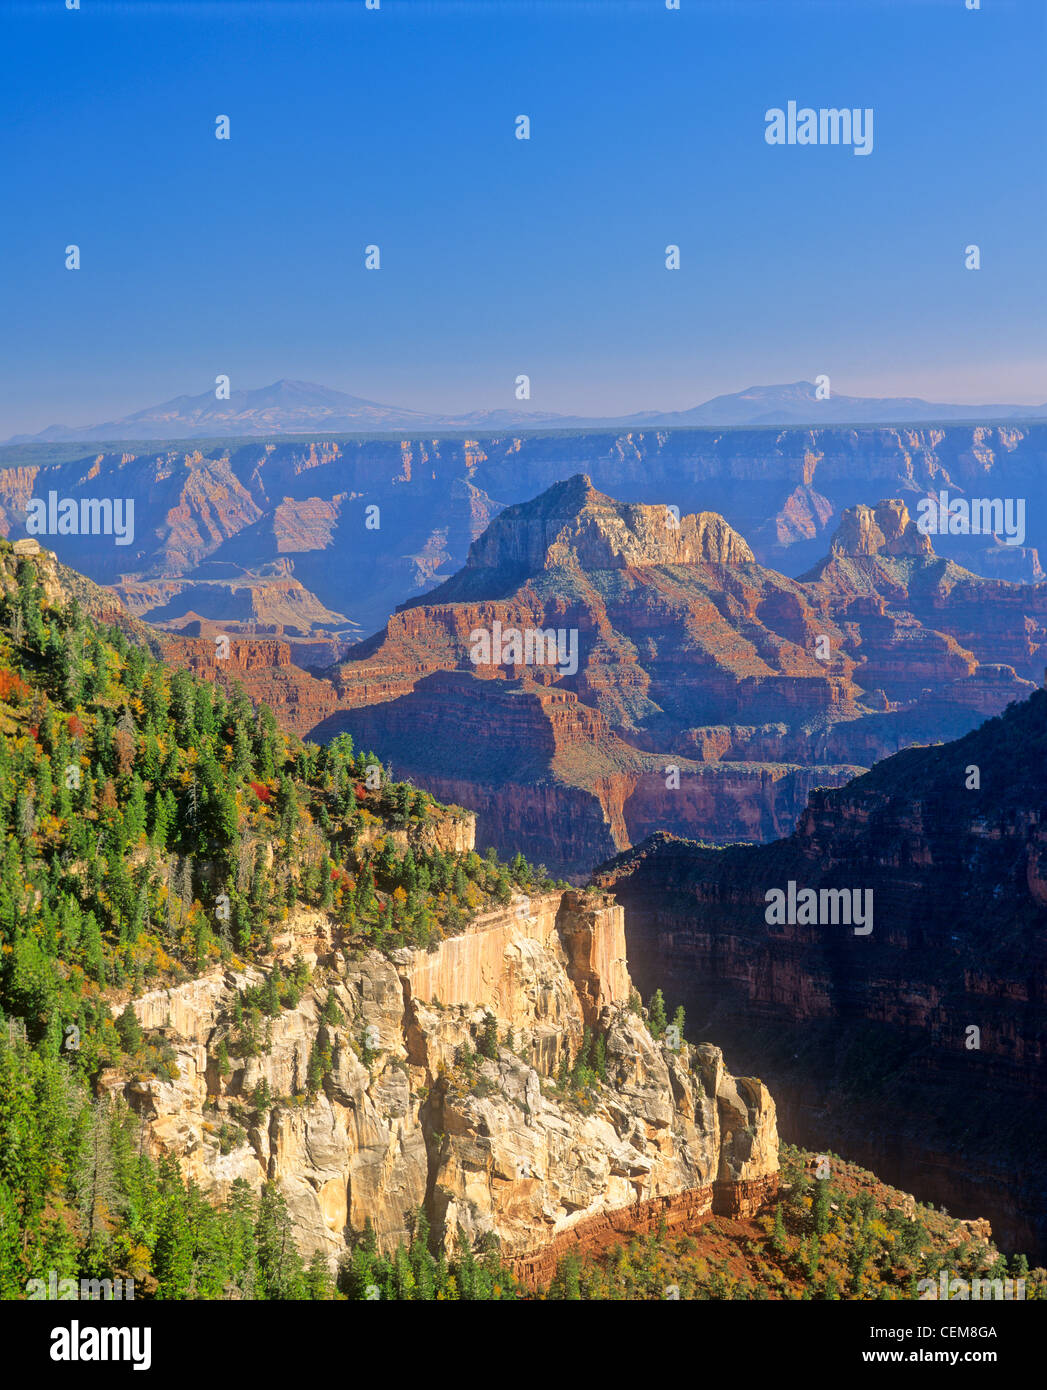 View across Grand Canyon from North Rim with San Francisco Peaks in distance, Grand Canyon National Park, Arizona, USA Stock Photo